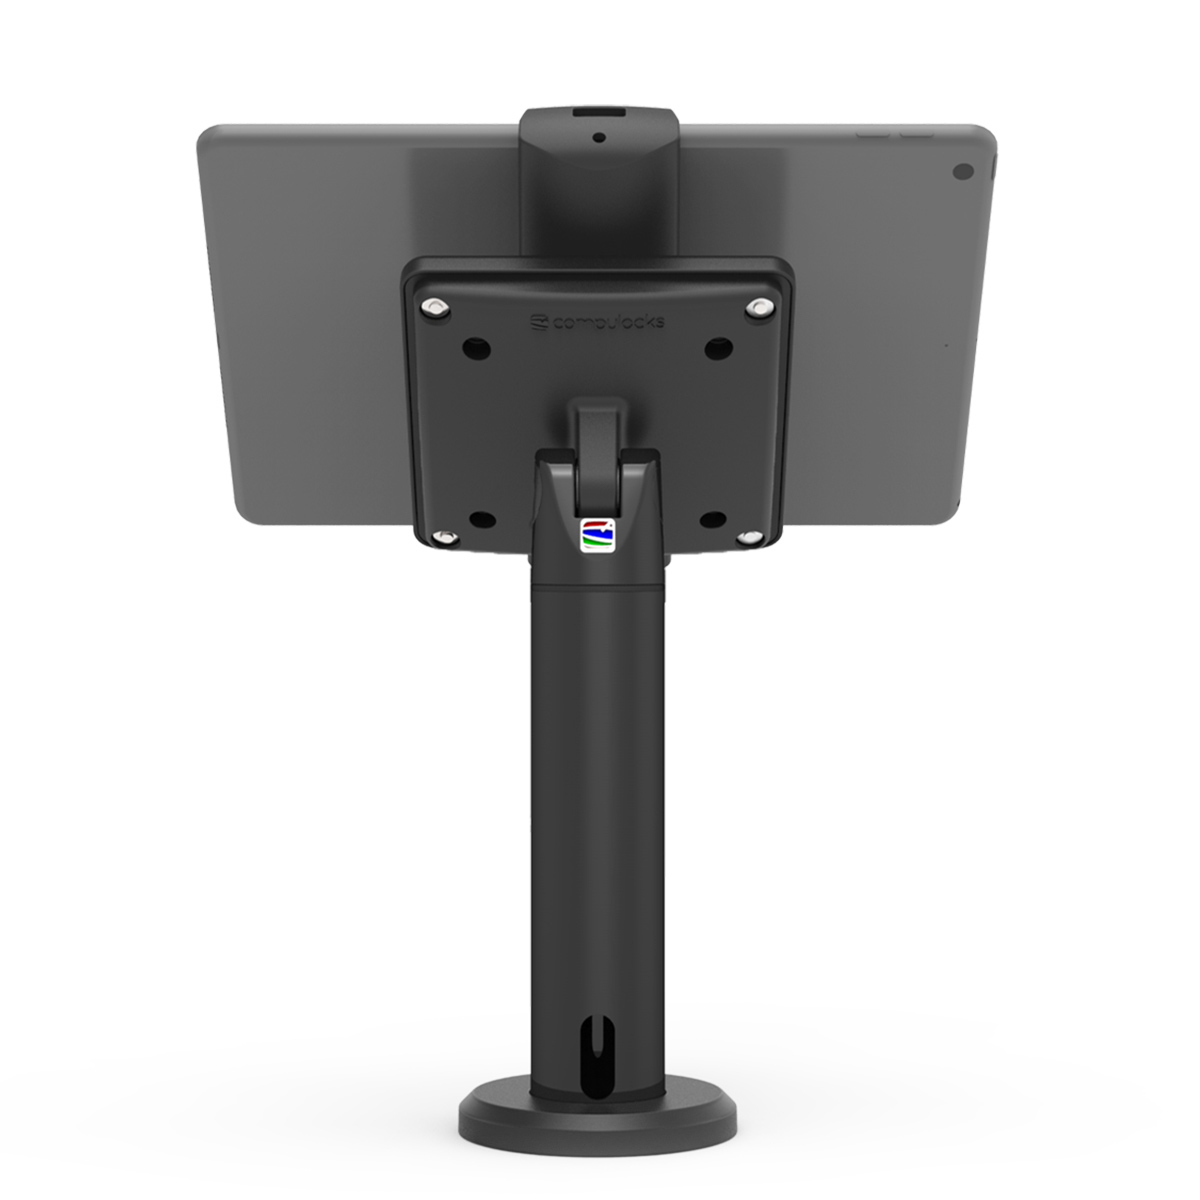 TCDP04UCLGVWMB MACLOCKS The Rise Stand Kiosk and Cling Universal Wall MOunt - Mounting kit (universal mount, pole stand, mount cover) - for tablet - black - screen size: 7